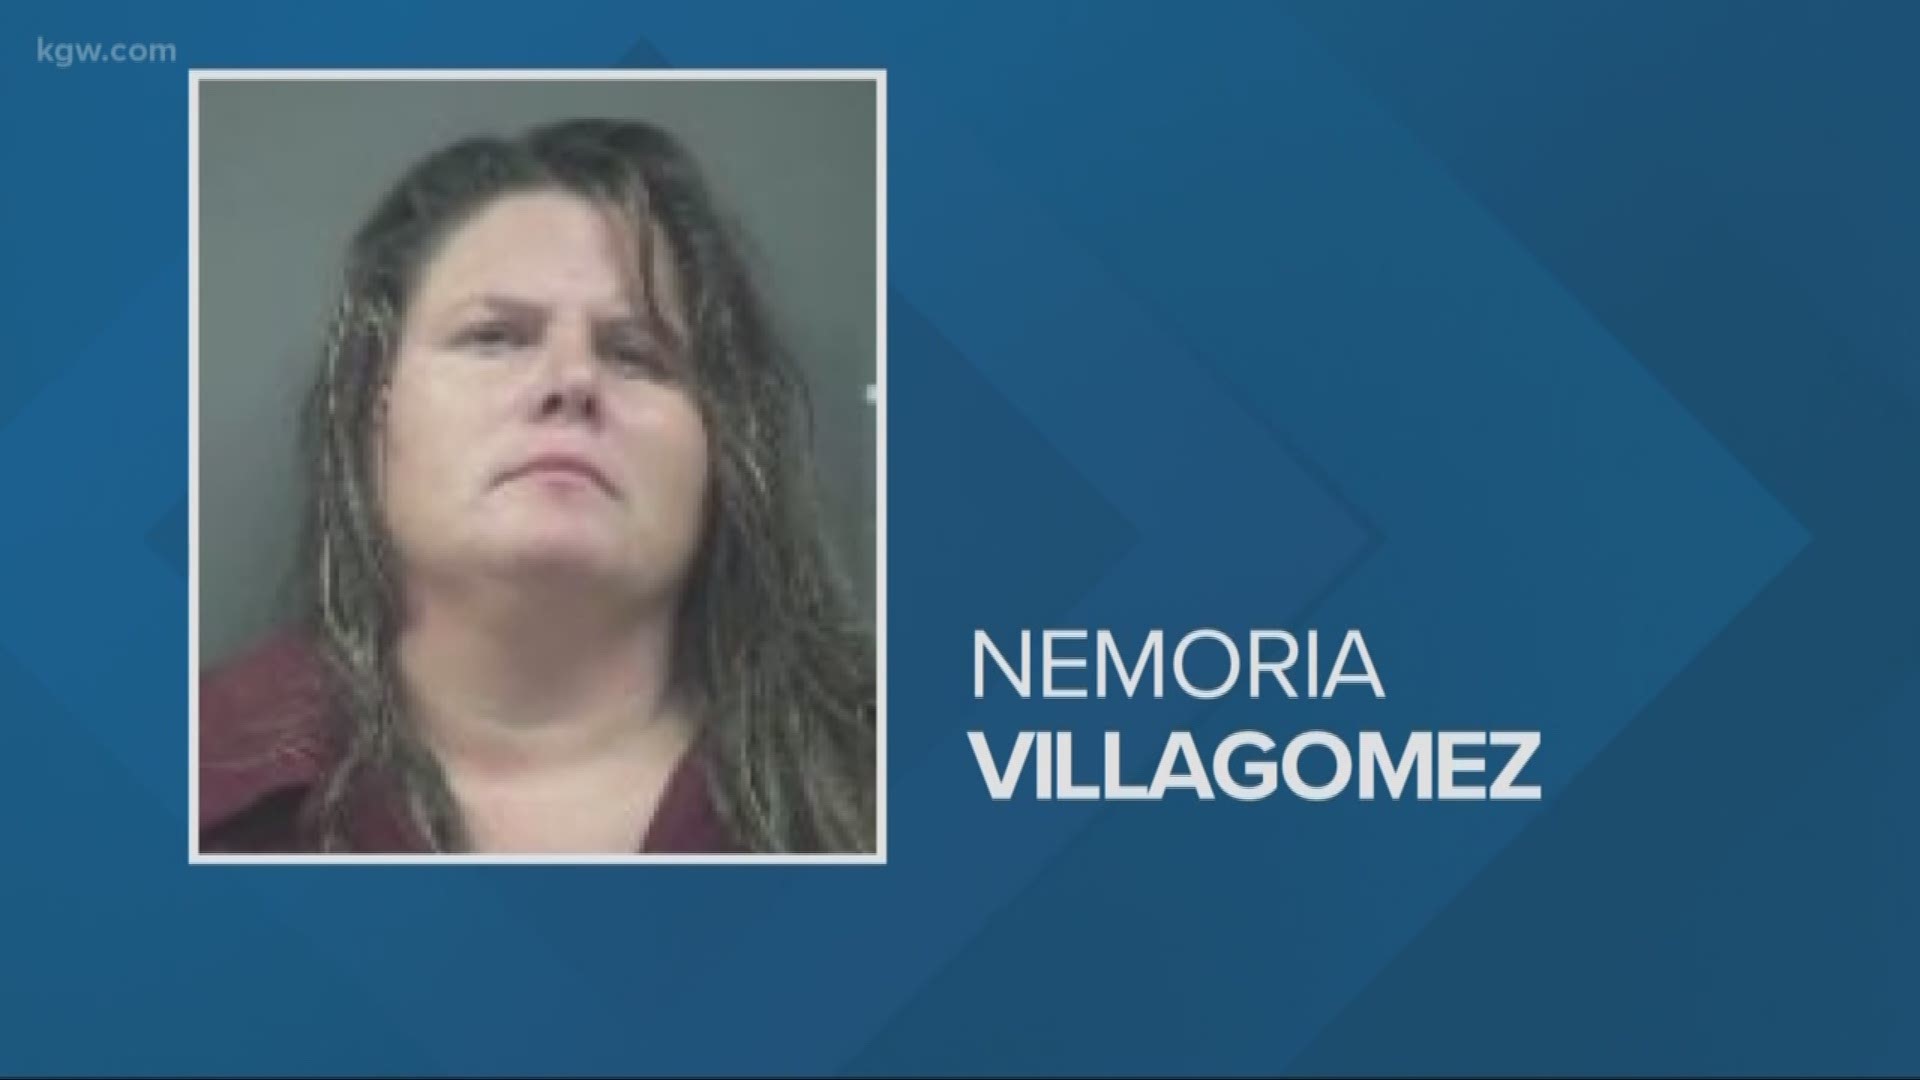 Court documents say a Newport mother told police her son deserved the stabbing.